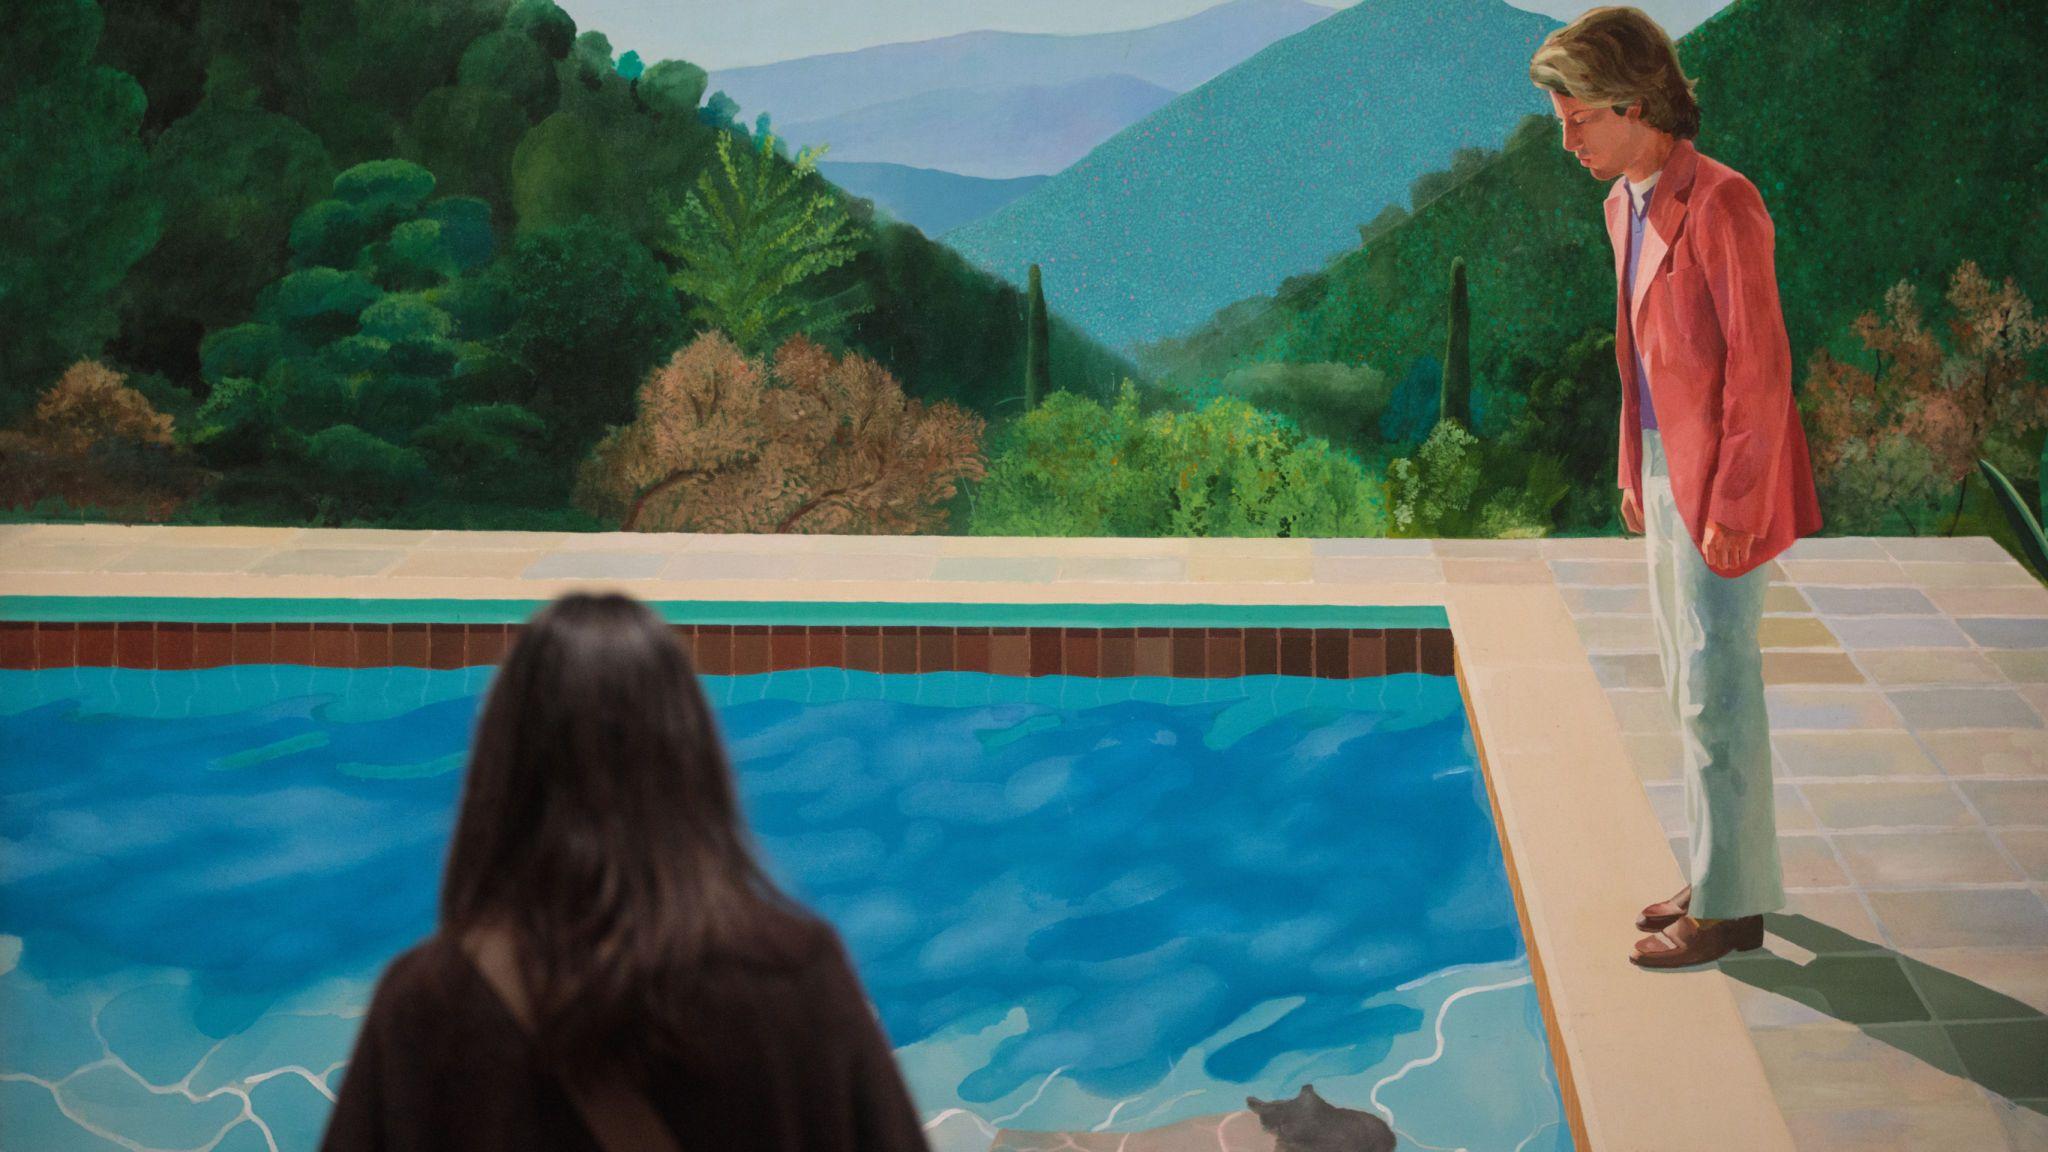 David Hockney painting fetches record £70m at auction. UK News